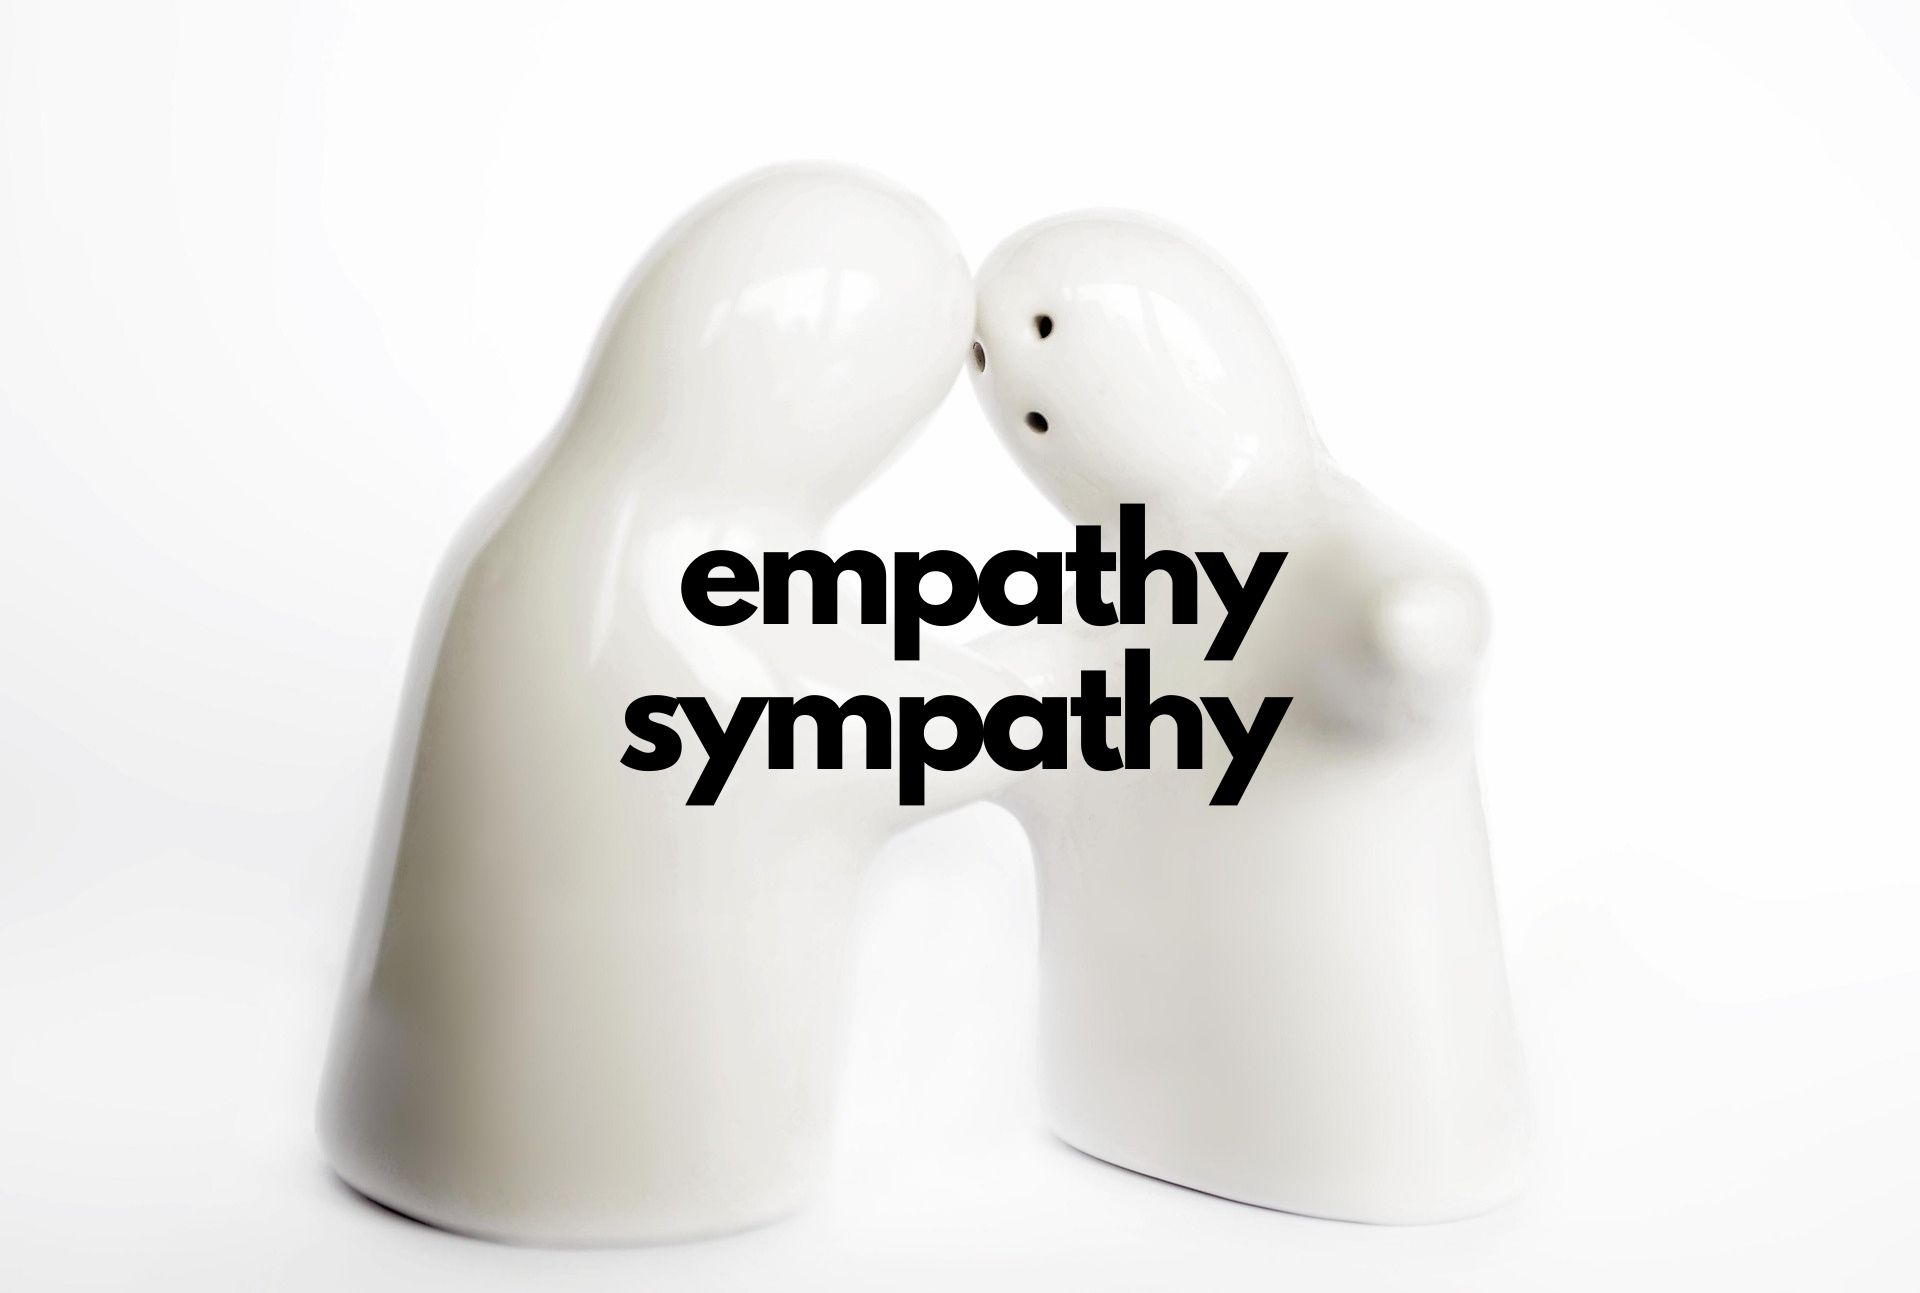 picture showing empathy and sympathy